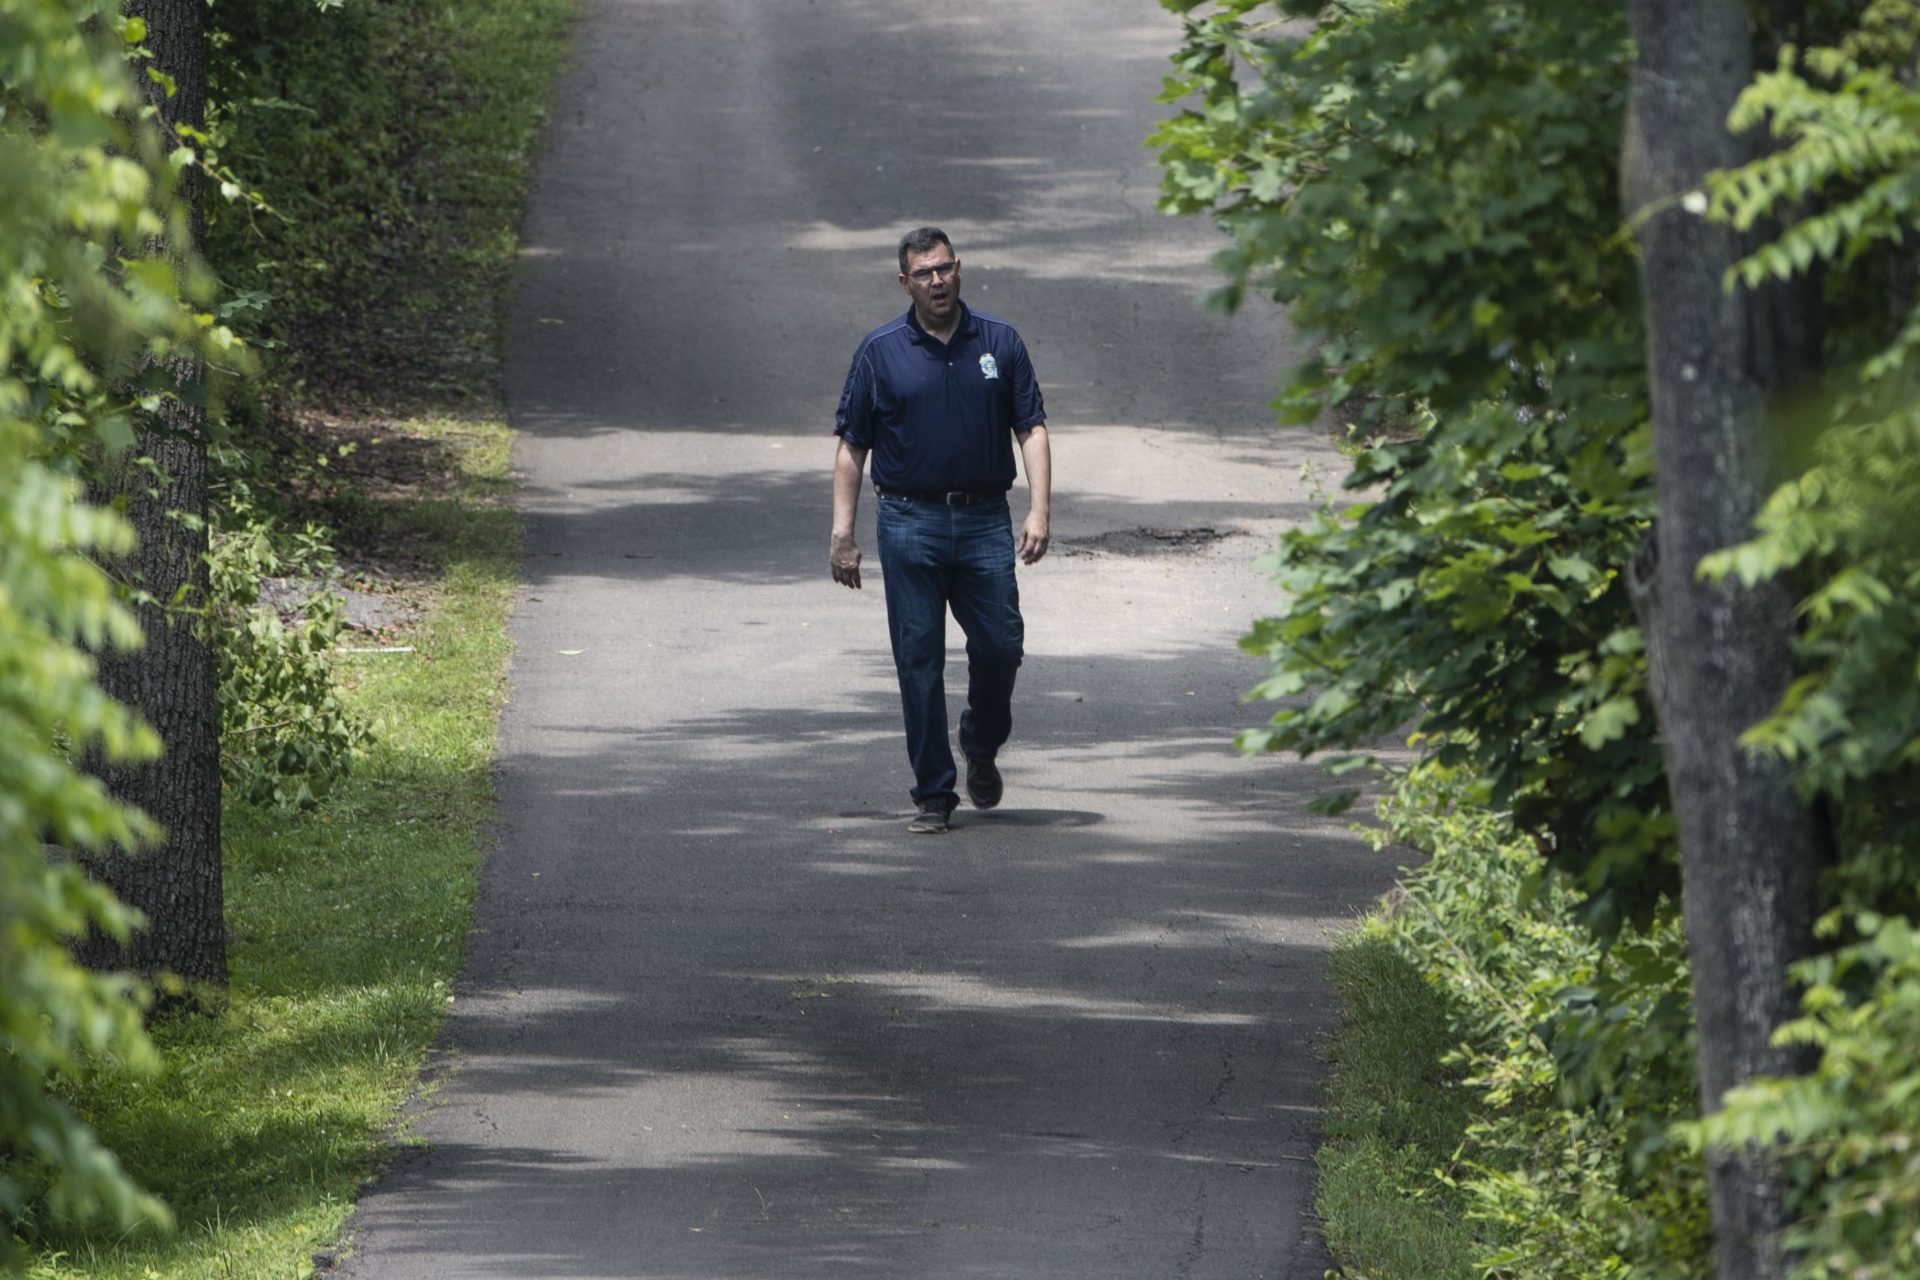 FILE PHOTO: Gregg Shore, First Assistant District Attorney for Bucks County, Pa., walks down a driveway, Wednesday, July 12, 2017, in Solebury, Pa., as the search continues for four missing young Pennsylvania men feared to be the victims of foul play.